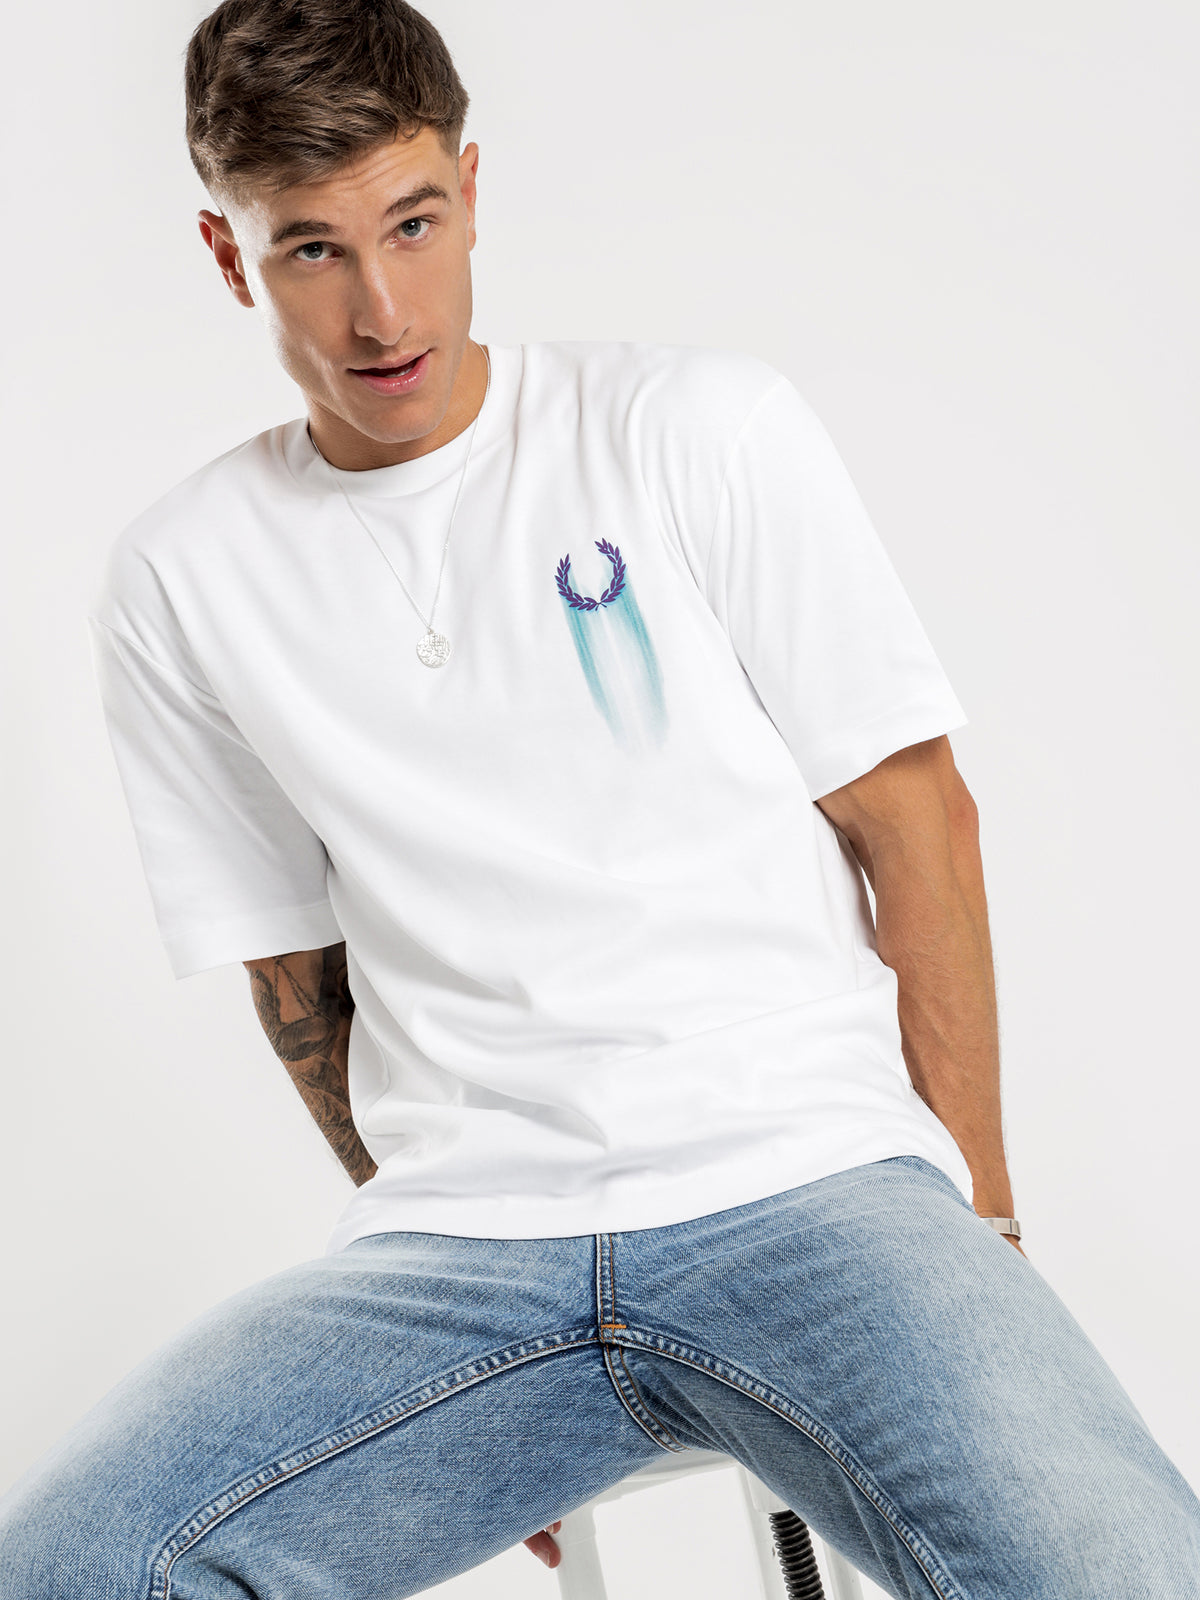 Abstract Sport T-Shirt in White